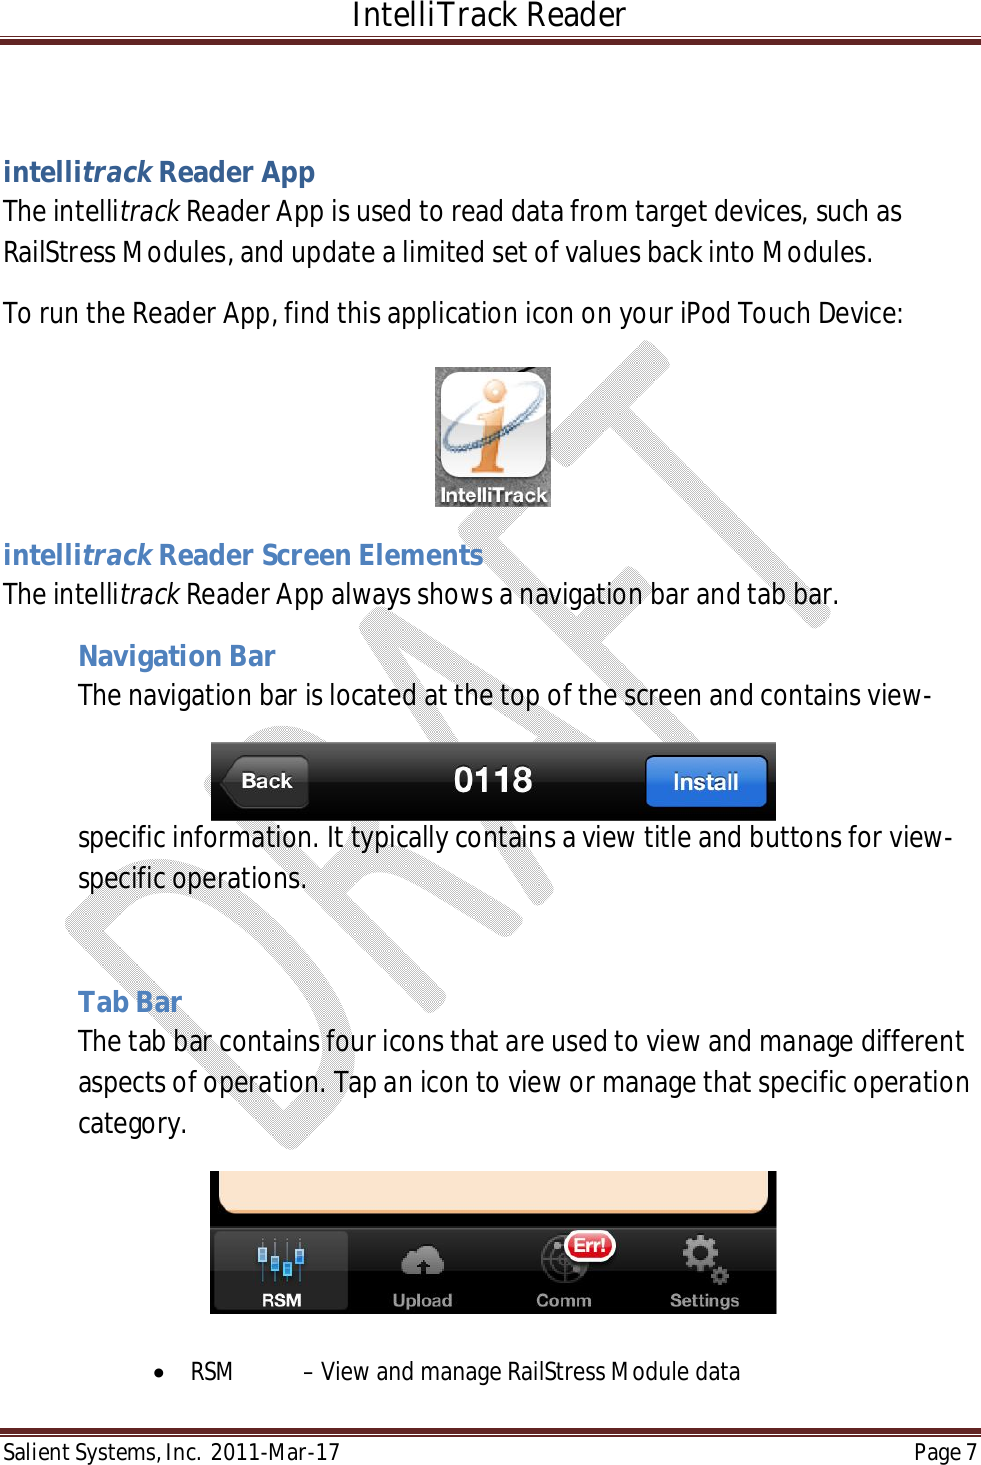 IntelliTrack Reader  Salient Systems, Inc.  2011-Mar-17 Page 7   intellitrack Reader App The intellitrack Reader App is used to read data from target devices, such as RailStress Modules, and update a limited set of values back into Modules. To run the Reader App, find this application icon on your iPod Touch Device:       intellitrack Reader Screen Elements The intellitrack Reader App always shows a navigation bar and tab bar.    Navigation Bar The navigation bar is located at the top of the screen and contains view-specific information. It typically contains a view title and buttons for view-specific operations.  Tab Bar The tab bar contains four icons that are used to view and manage different aspects of operation. Tap an icon to view or manage that specific operation category.   RSM  – View and manage RailStress Module data 